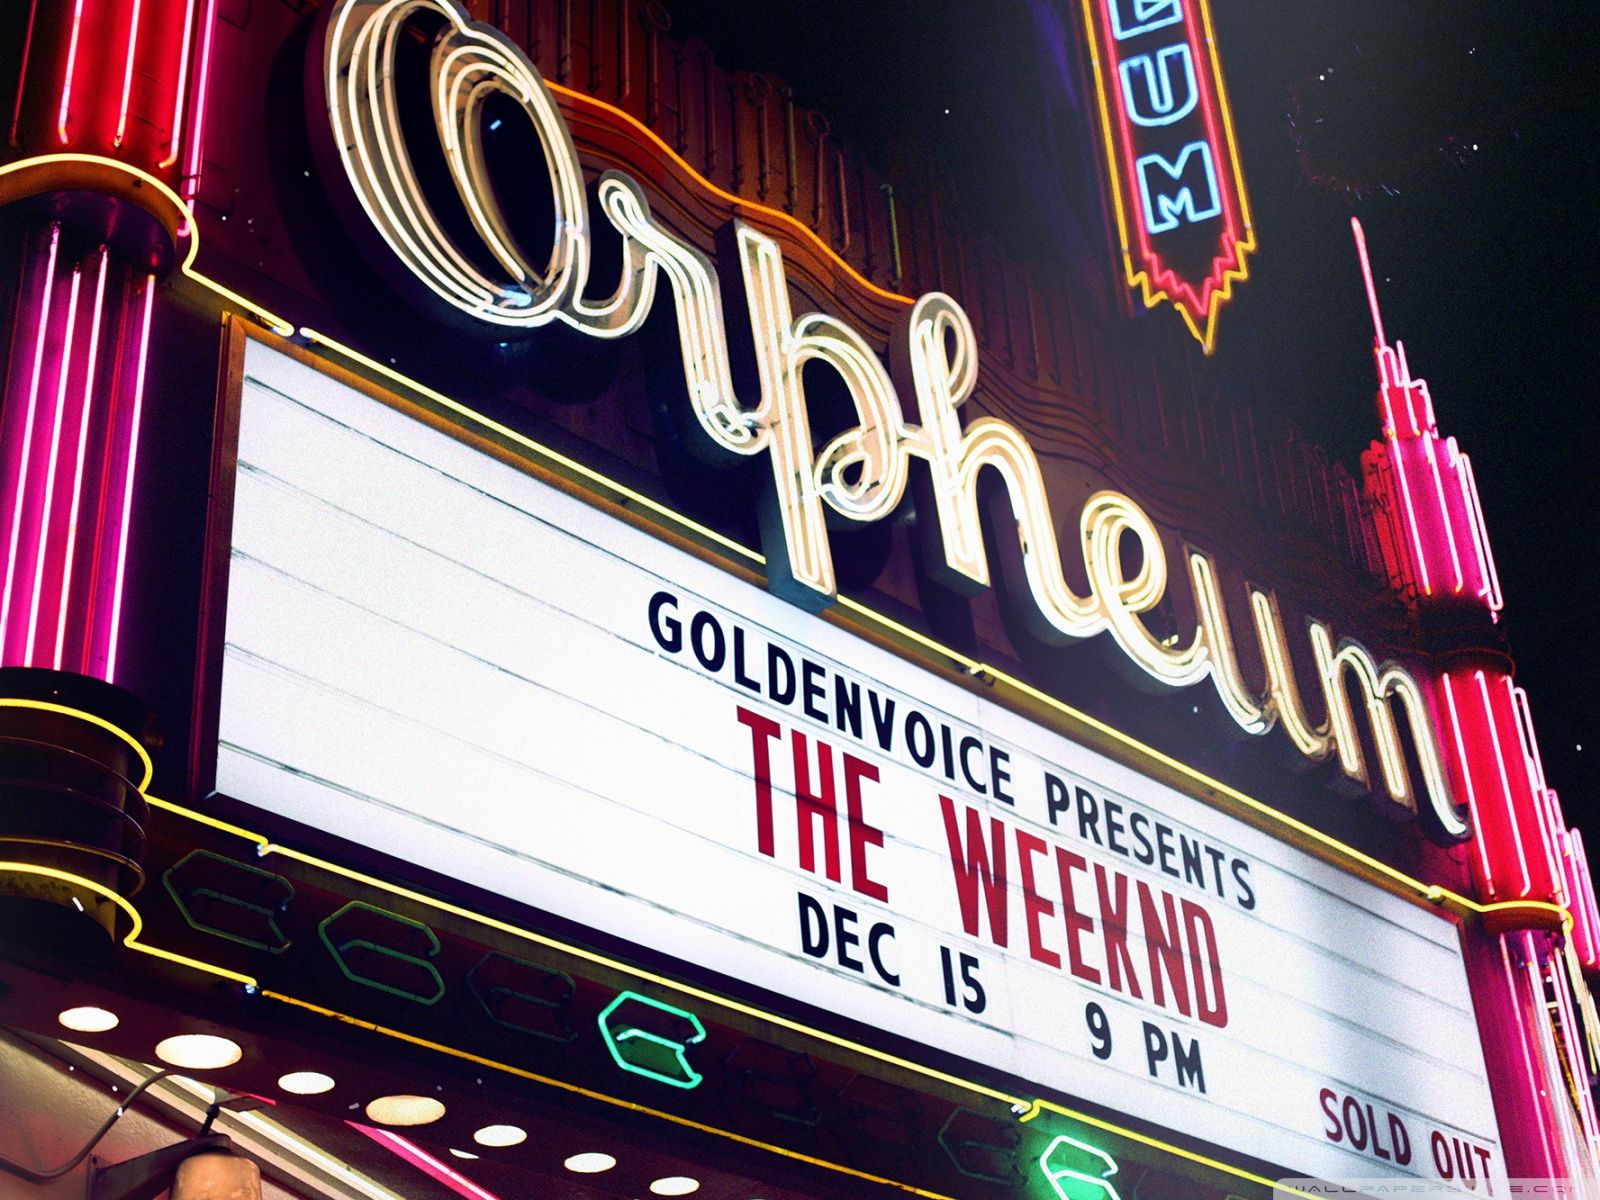 The Weeknd performs at the Orpheum Theatre on December 15th at 9 PM - The Weeknd